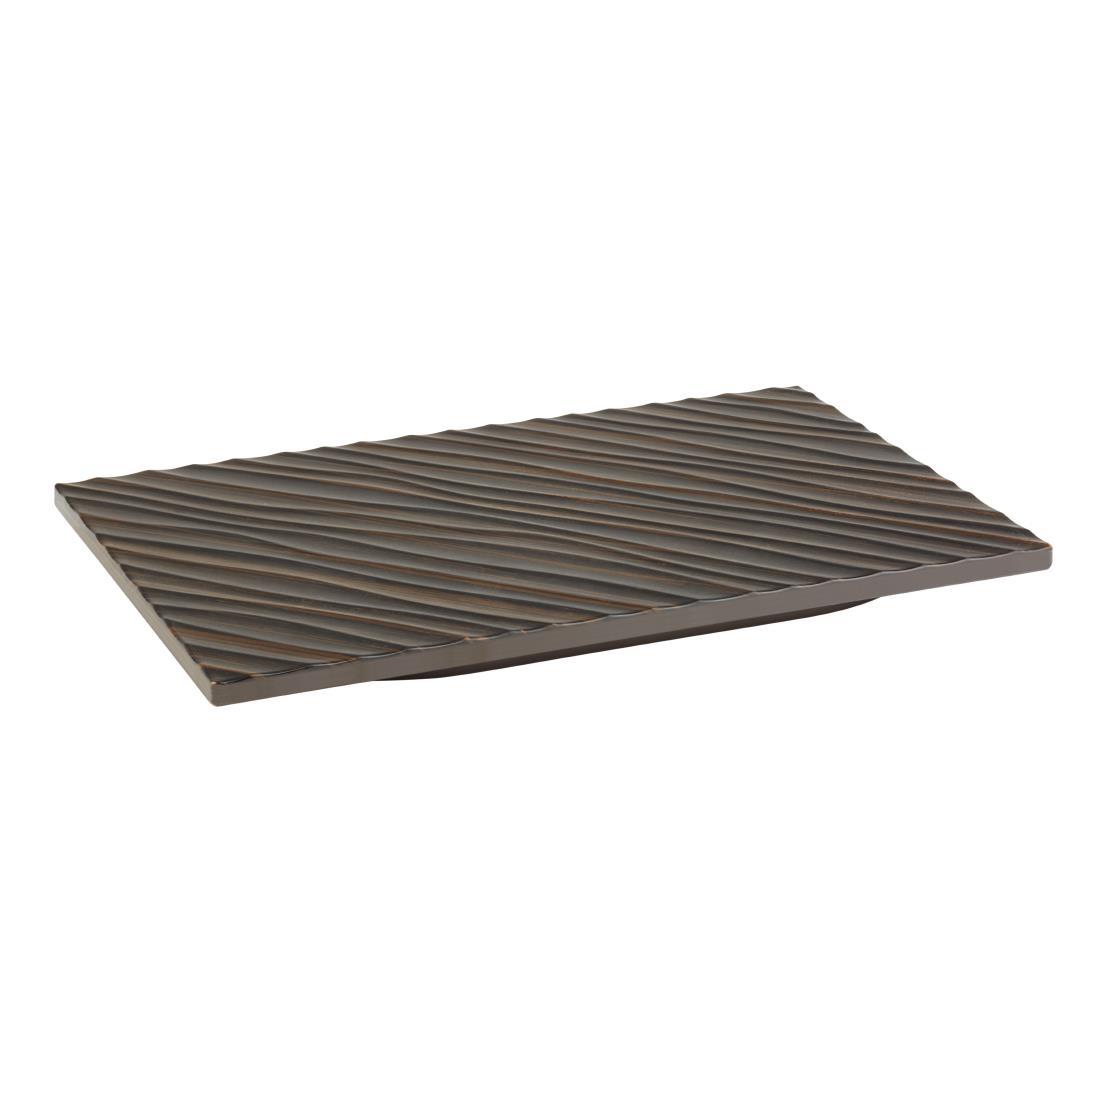 APS+ Tiles Tray Brown GN1/4 - Each - DT748 - 1